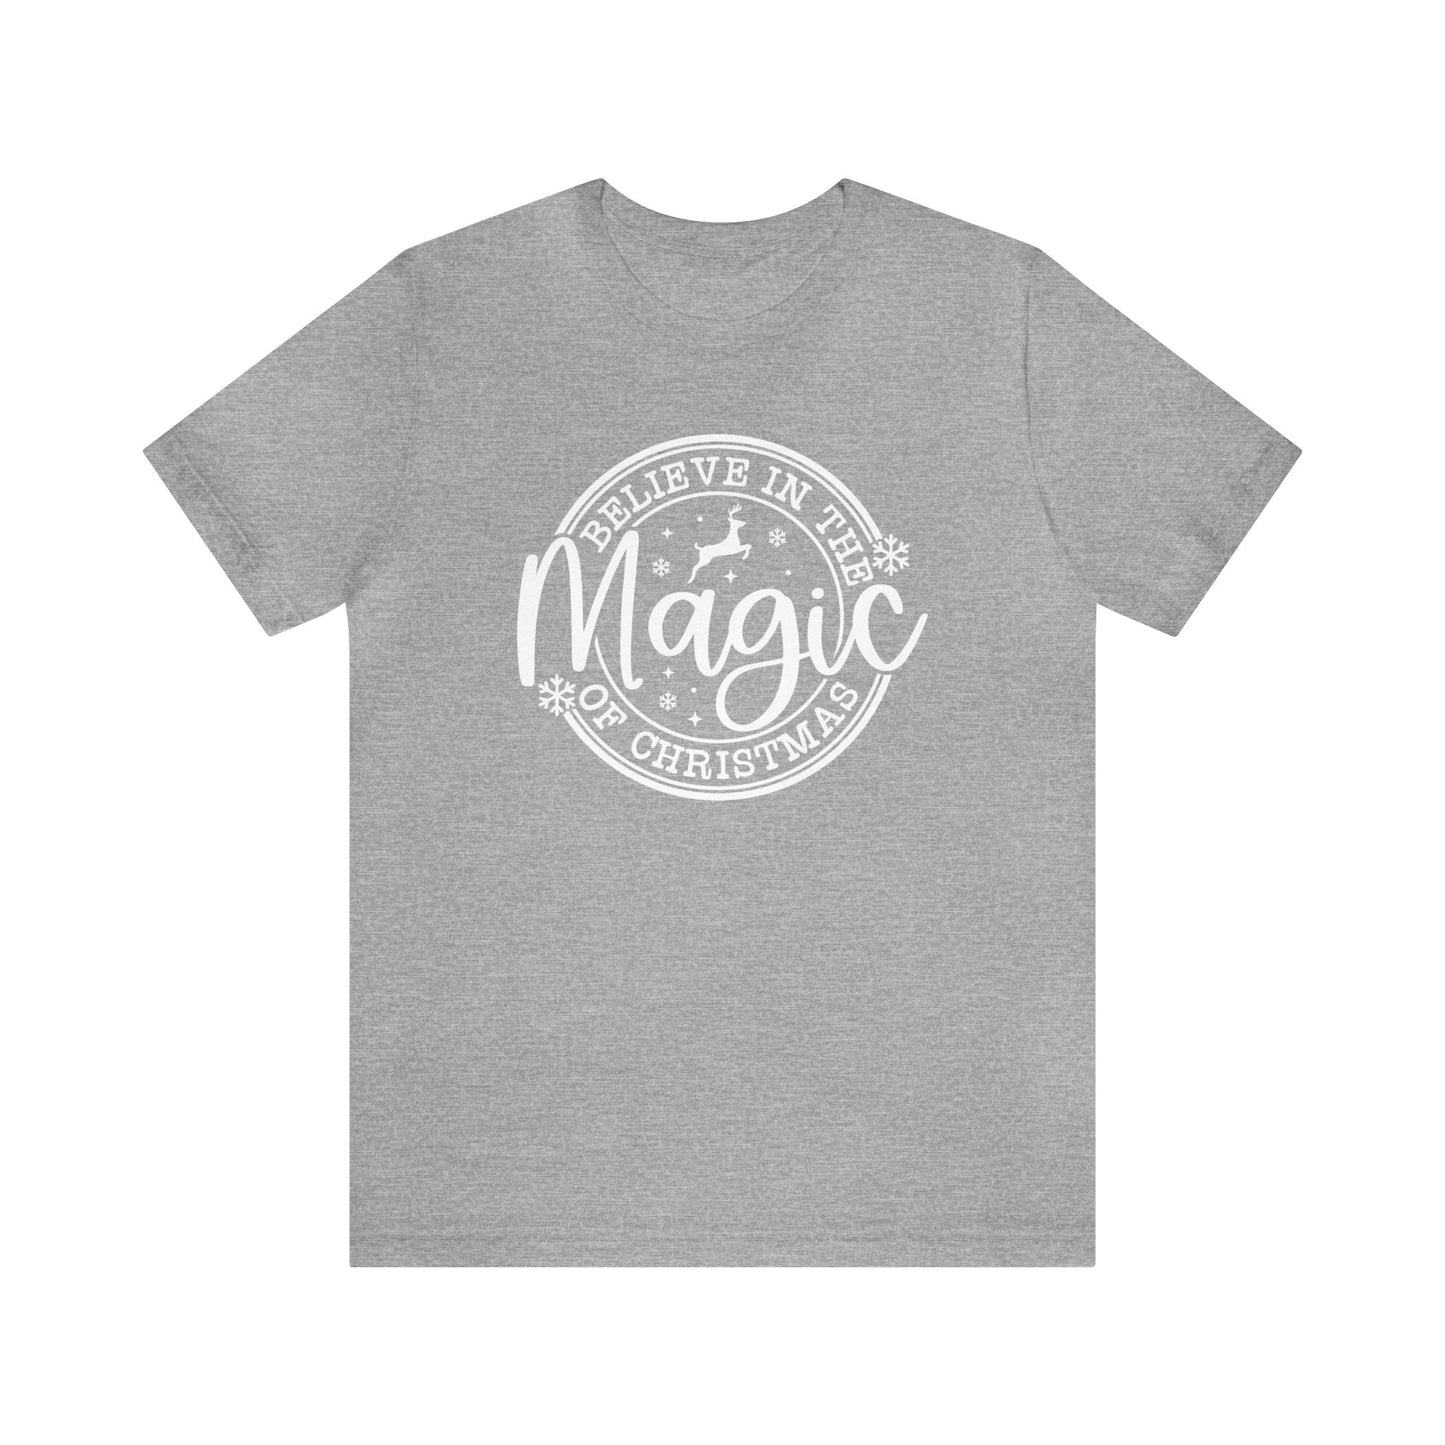 Believe in the Magic of Christmas Shirt Short Sleeve Tee